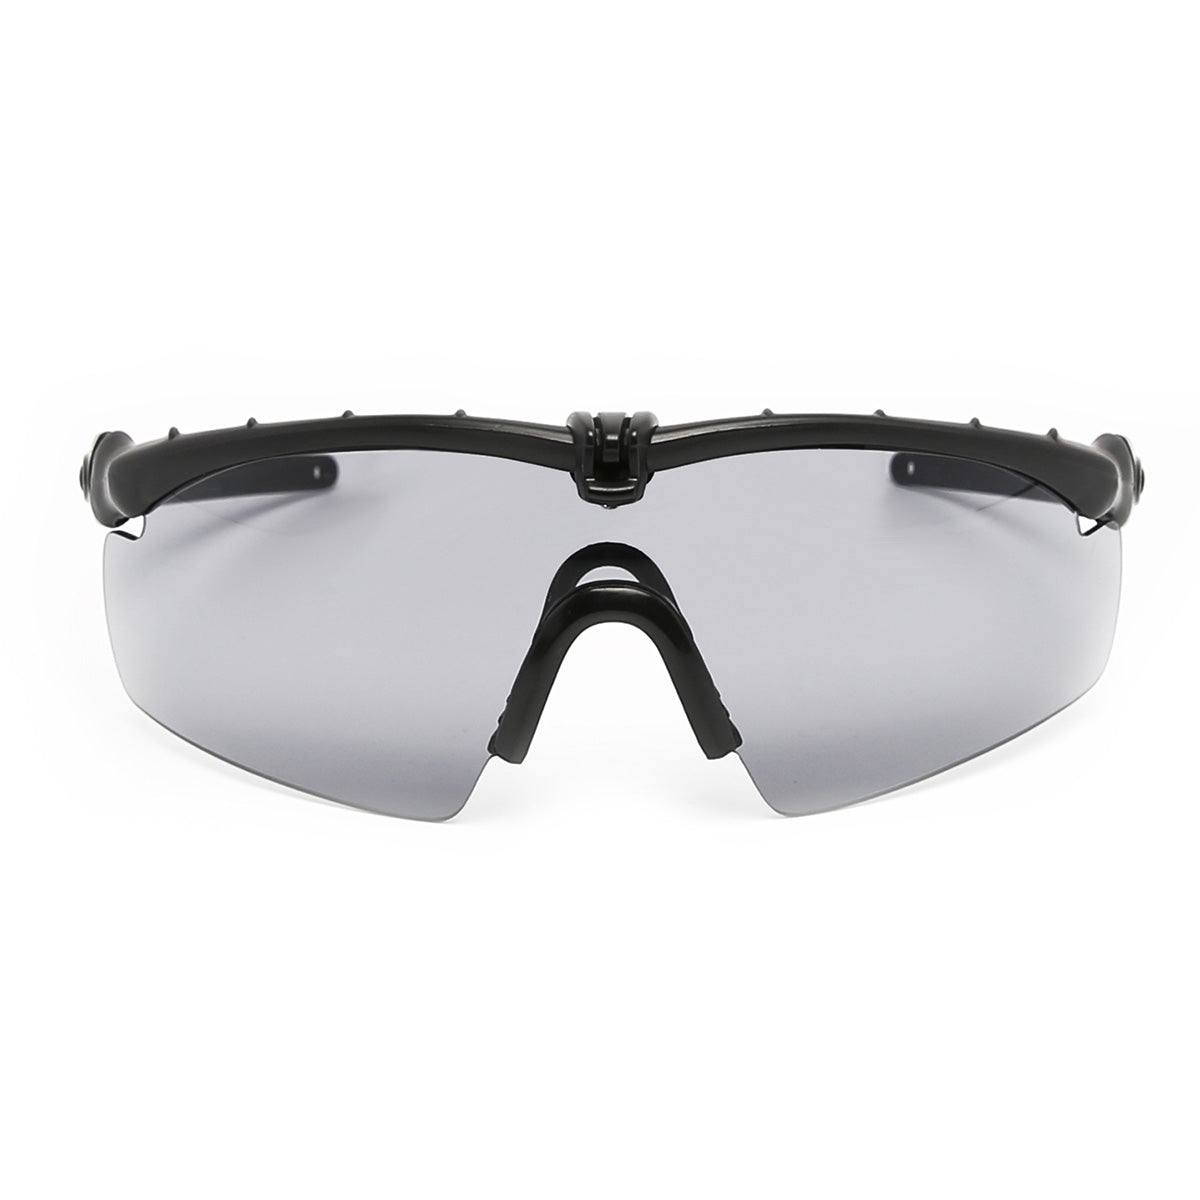 Sporty cycling sunglasses with 3 interchangeable color lenses & headband